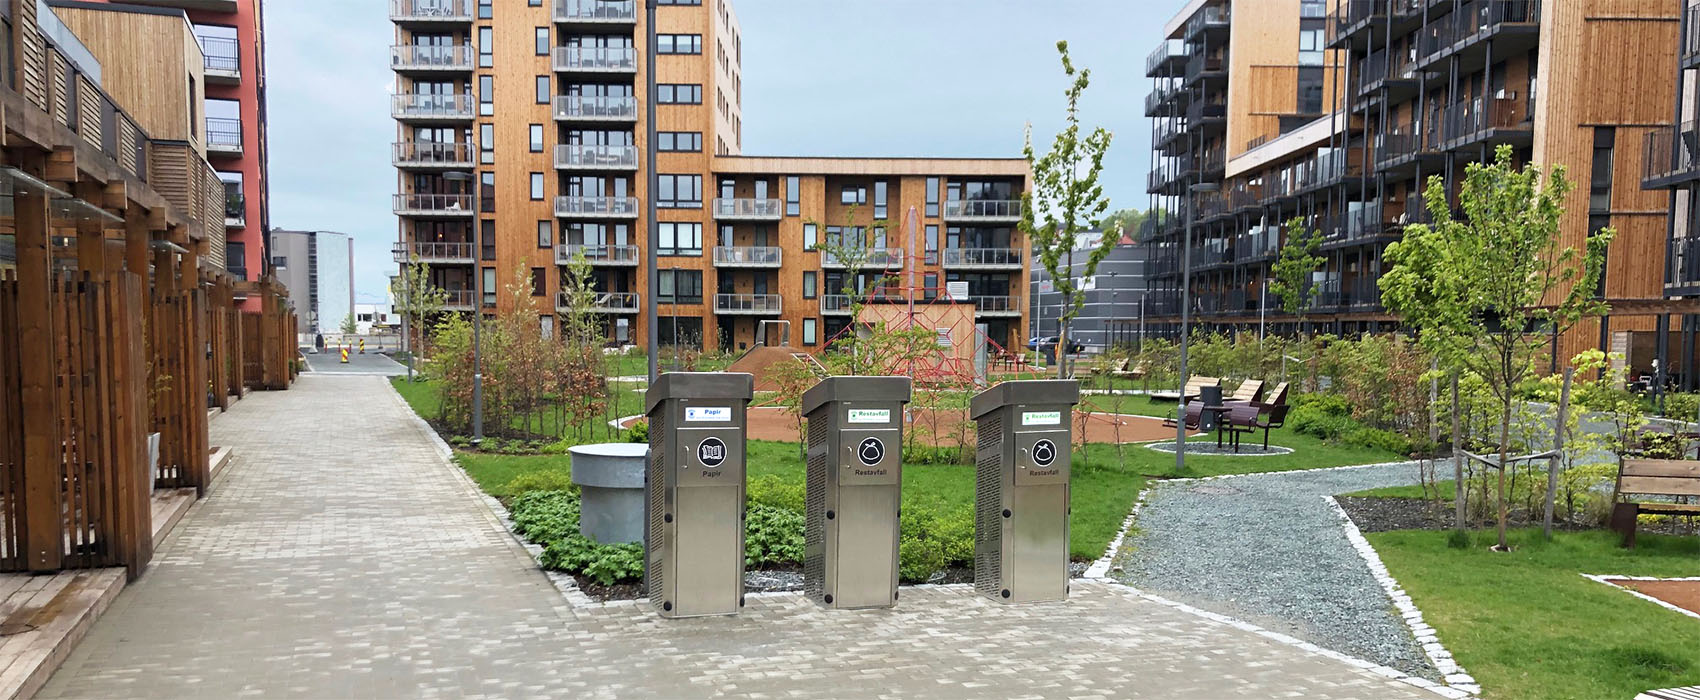 Automated vacuum waste collection systems for residential  and urban environments.